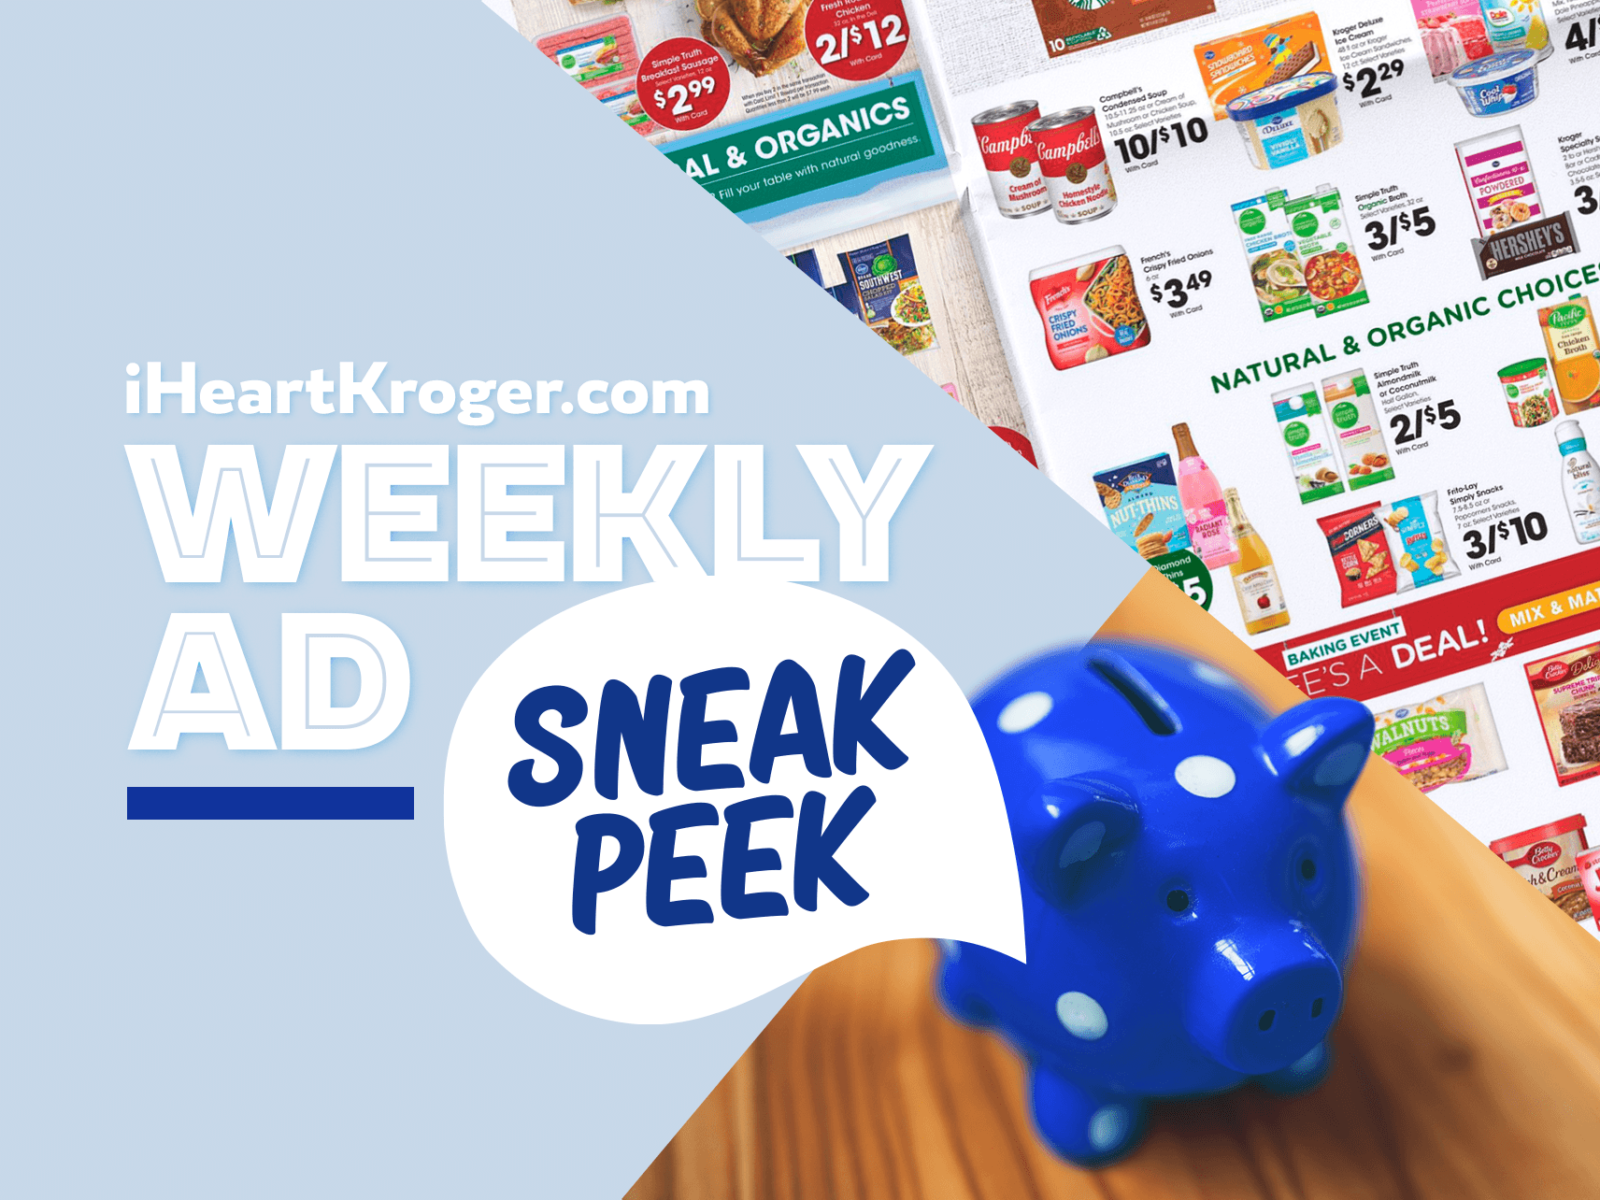 Kroger Ad & Coupons Week Of 4/19 to 4/25